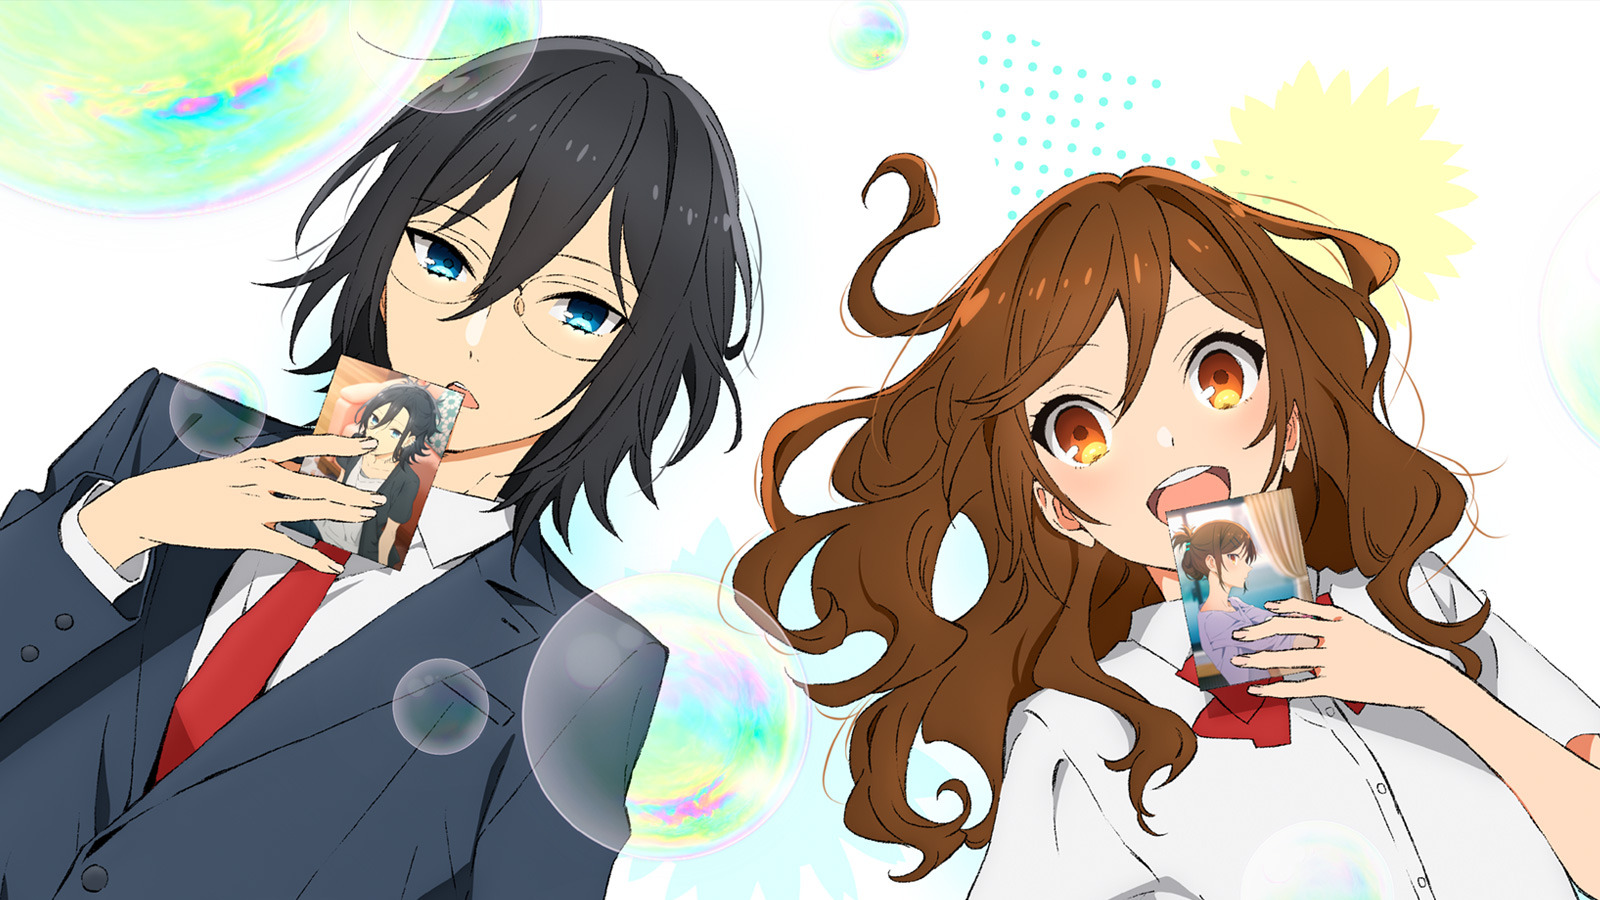 Will 'Horimiya' Have a Season 2? - We Got This Covered